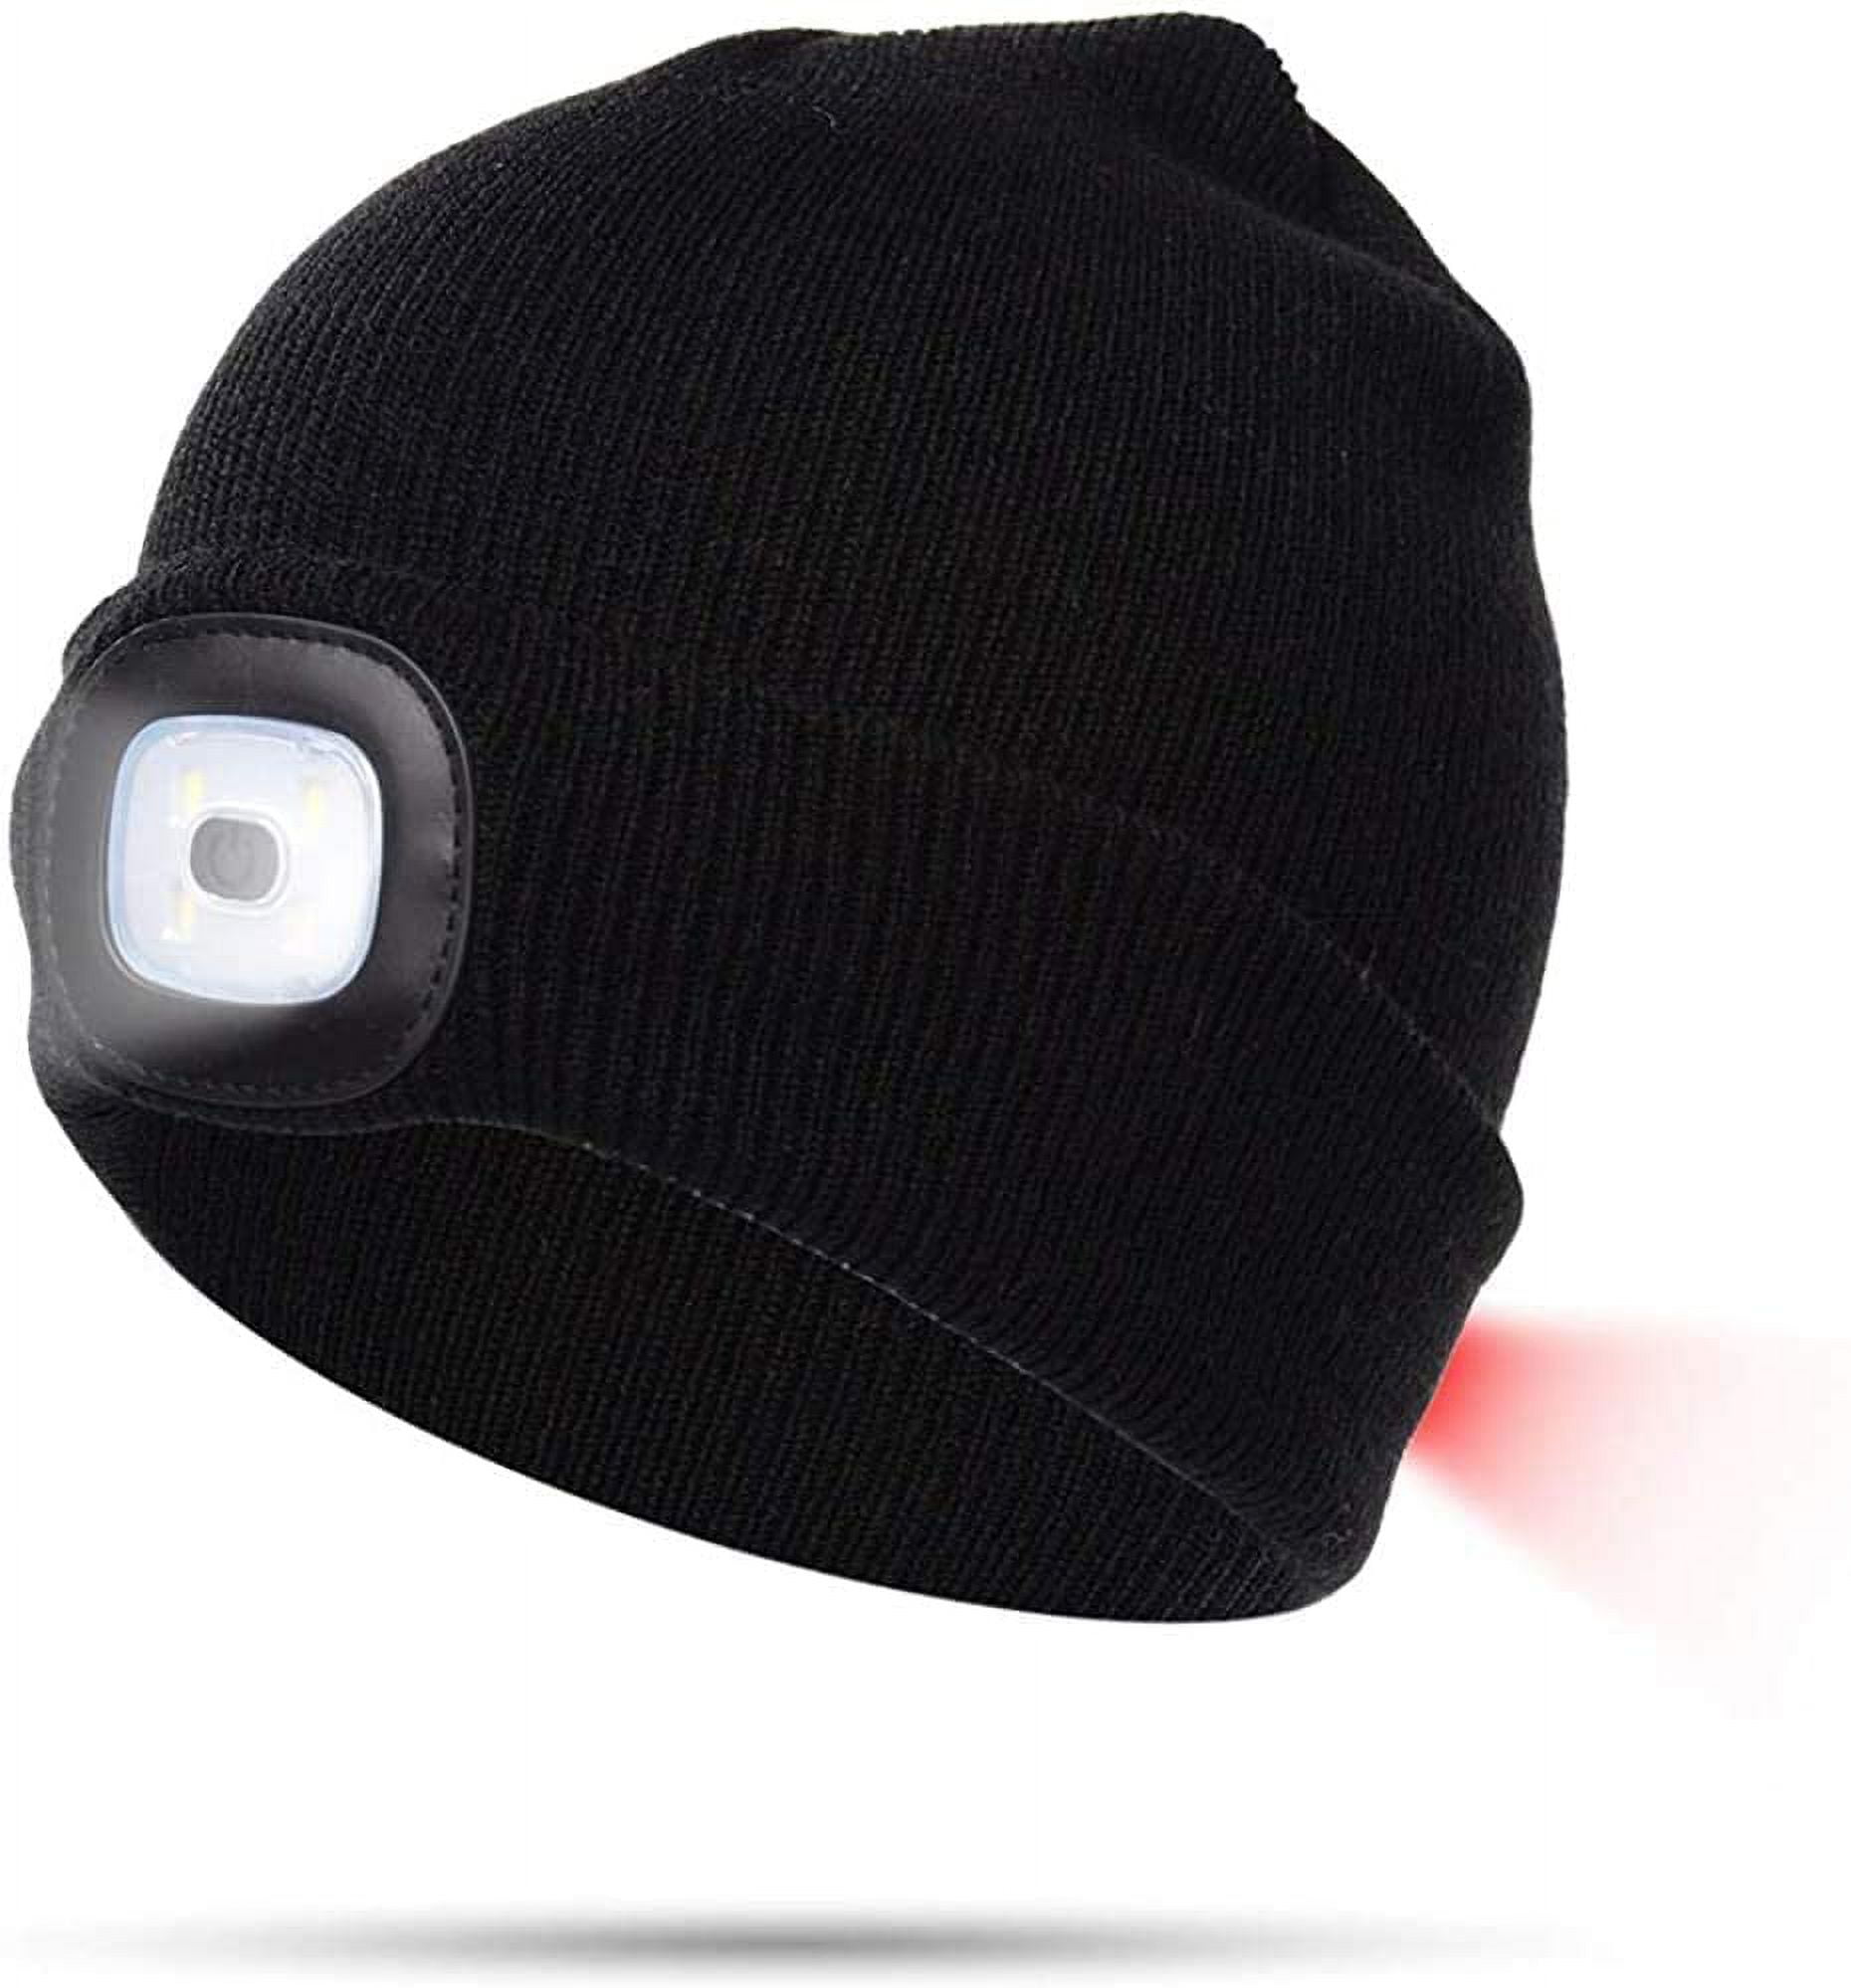 GRNSHTS Unisex LED Beanie Hat with Light, Gifts for Men Dad Him Women USB  Rechargeable Winter Knit Lighted Headlight Headlamp Cap Flashlight Hat with